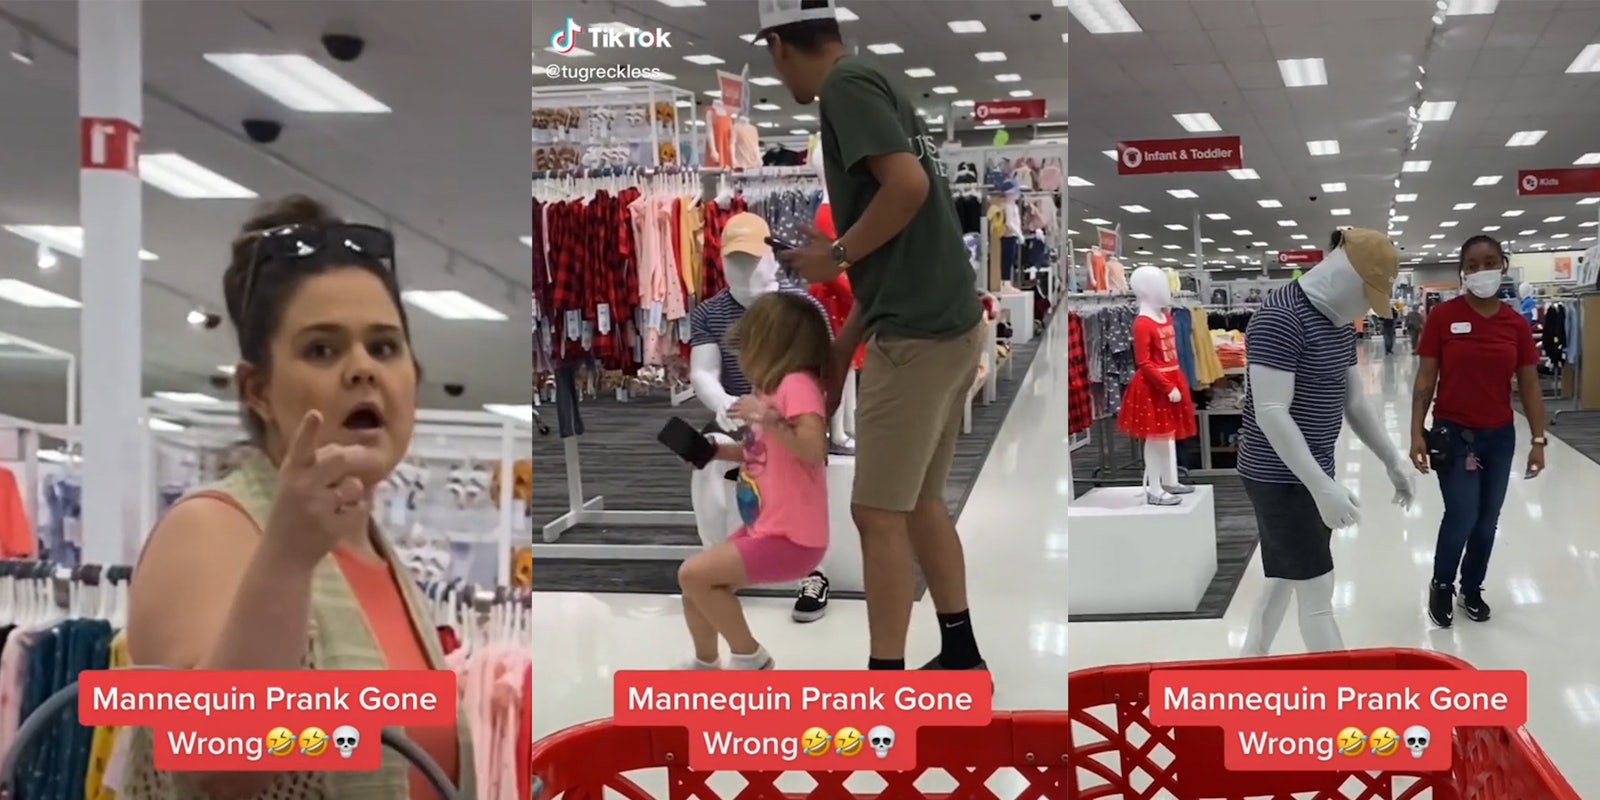 woman pointing (l) girl stumbling in front of man (c) man dressed as mannequin walking with head hanging in shame (r) all with caption 'mannequin prank gone wrong'